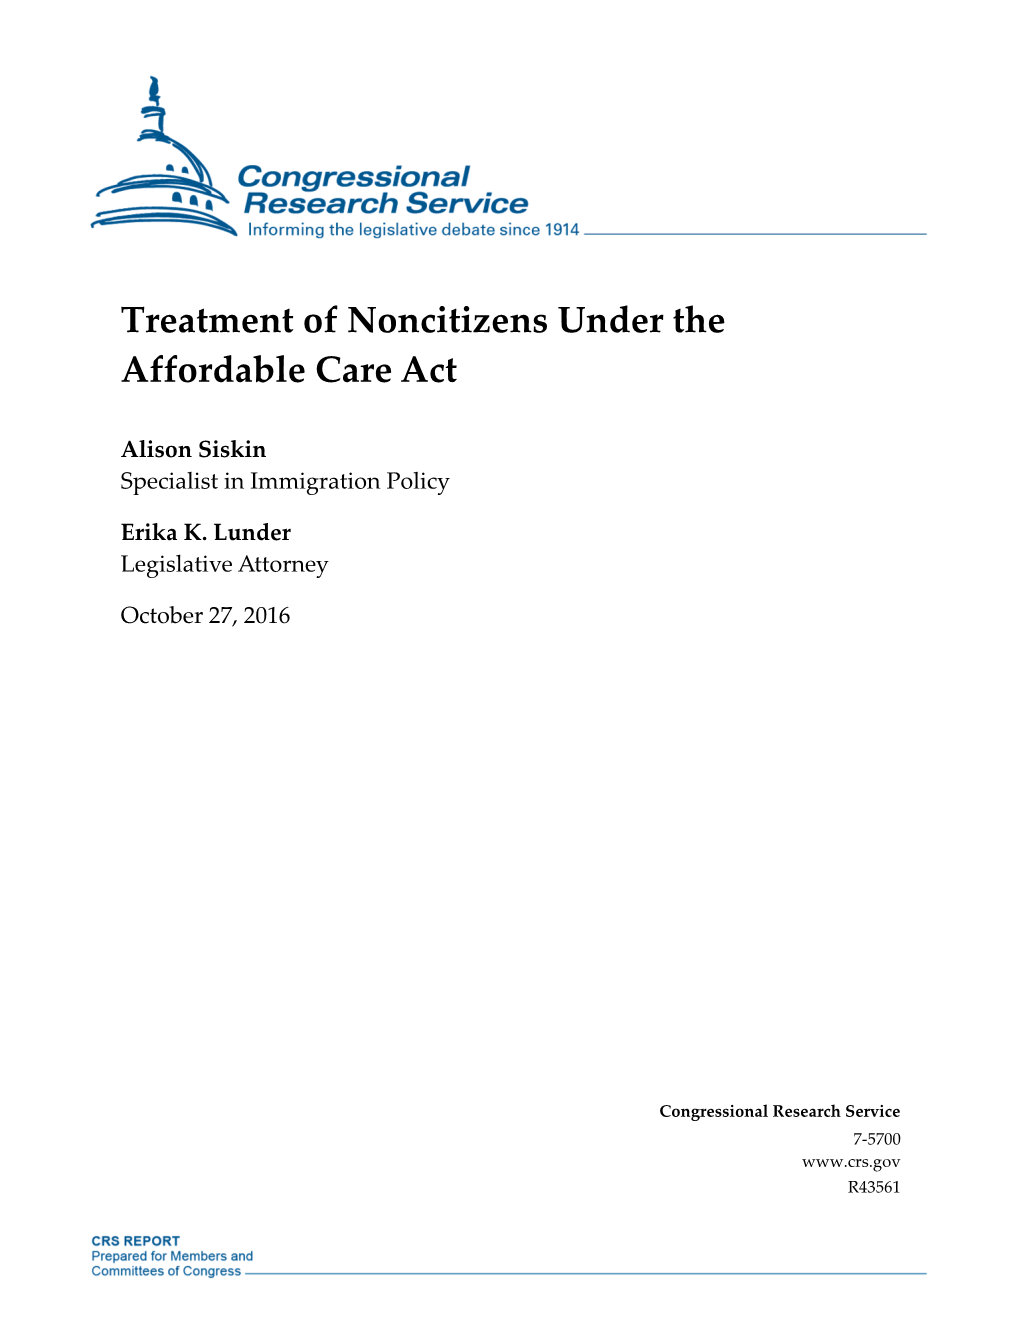 Treatment of Noncitizens Under the Affordable Care Act